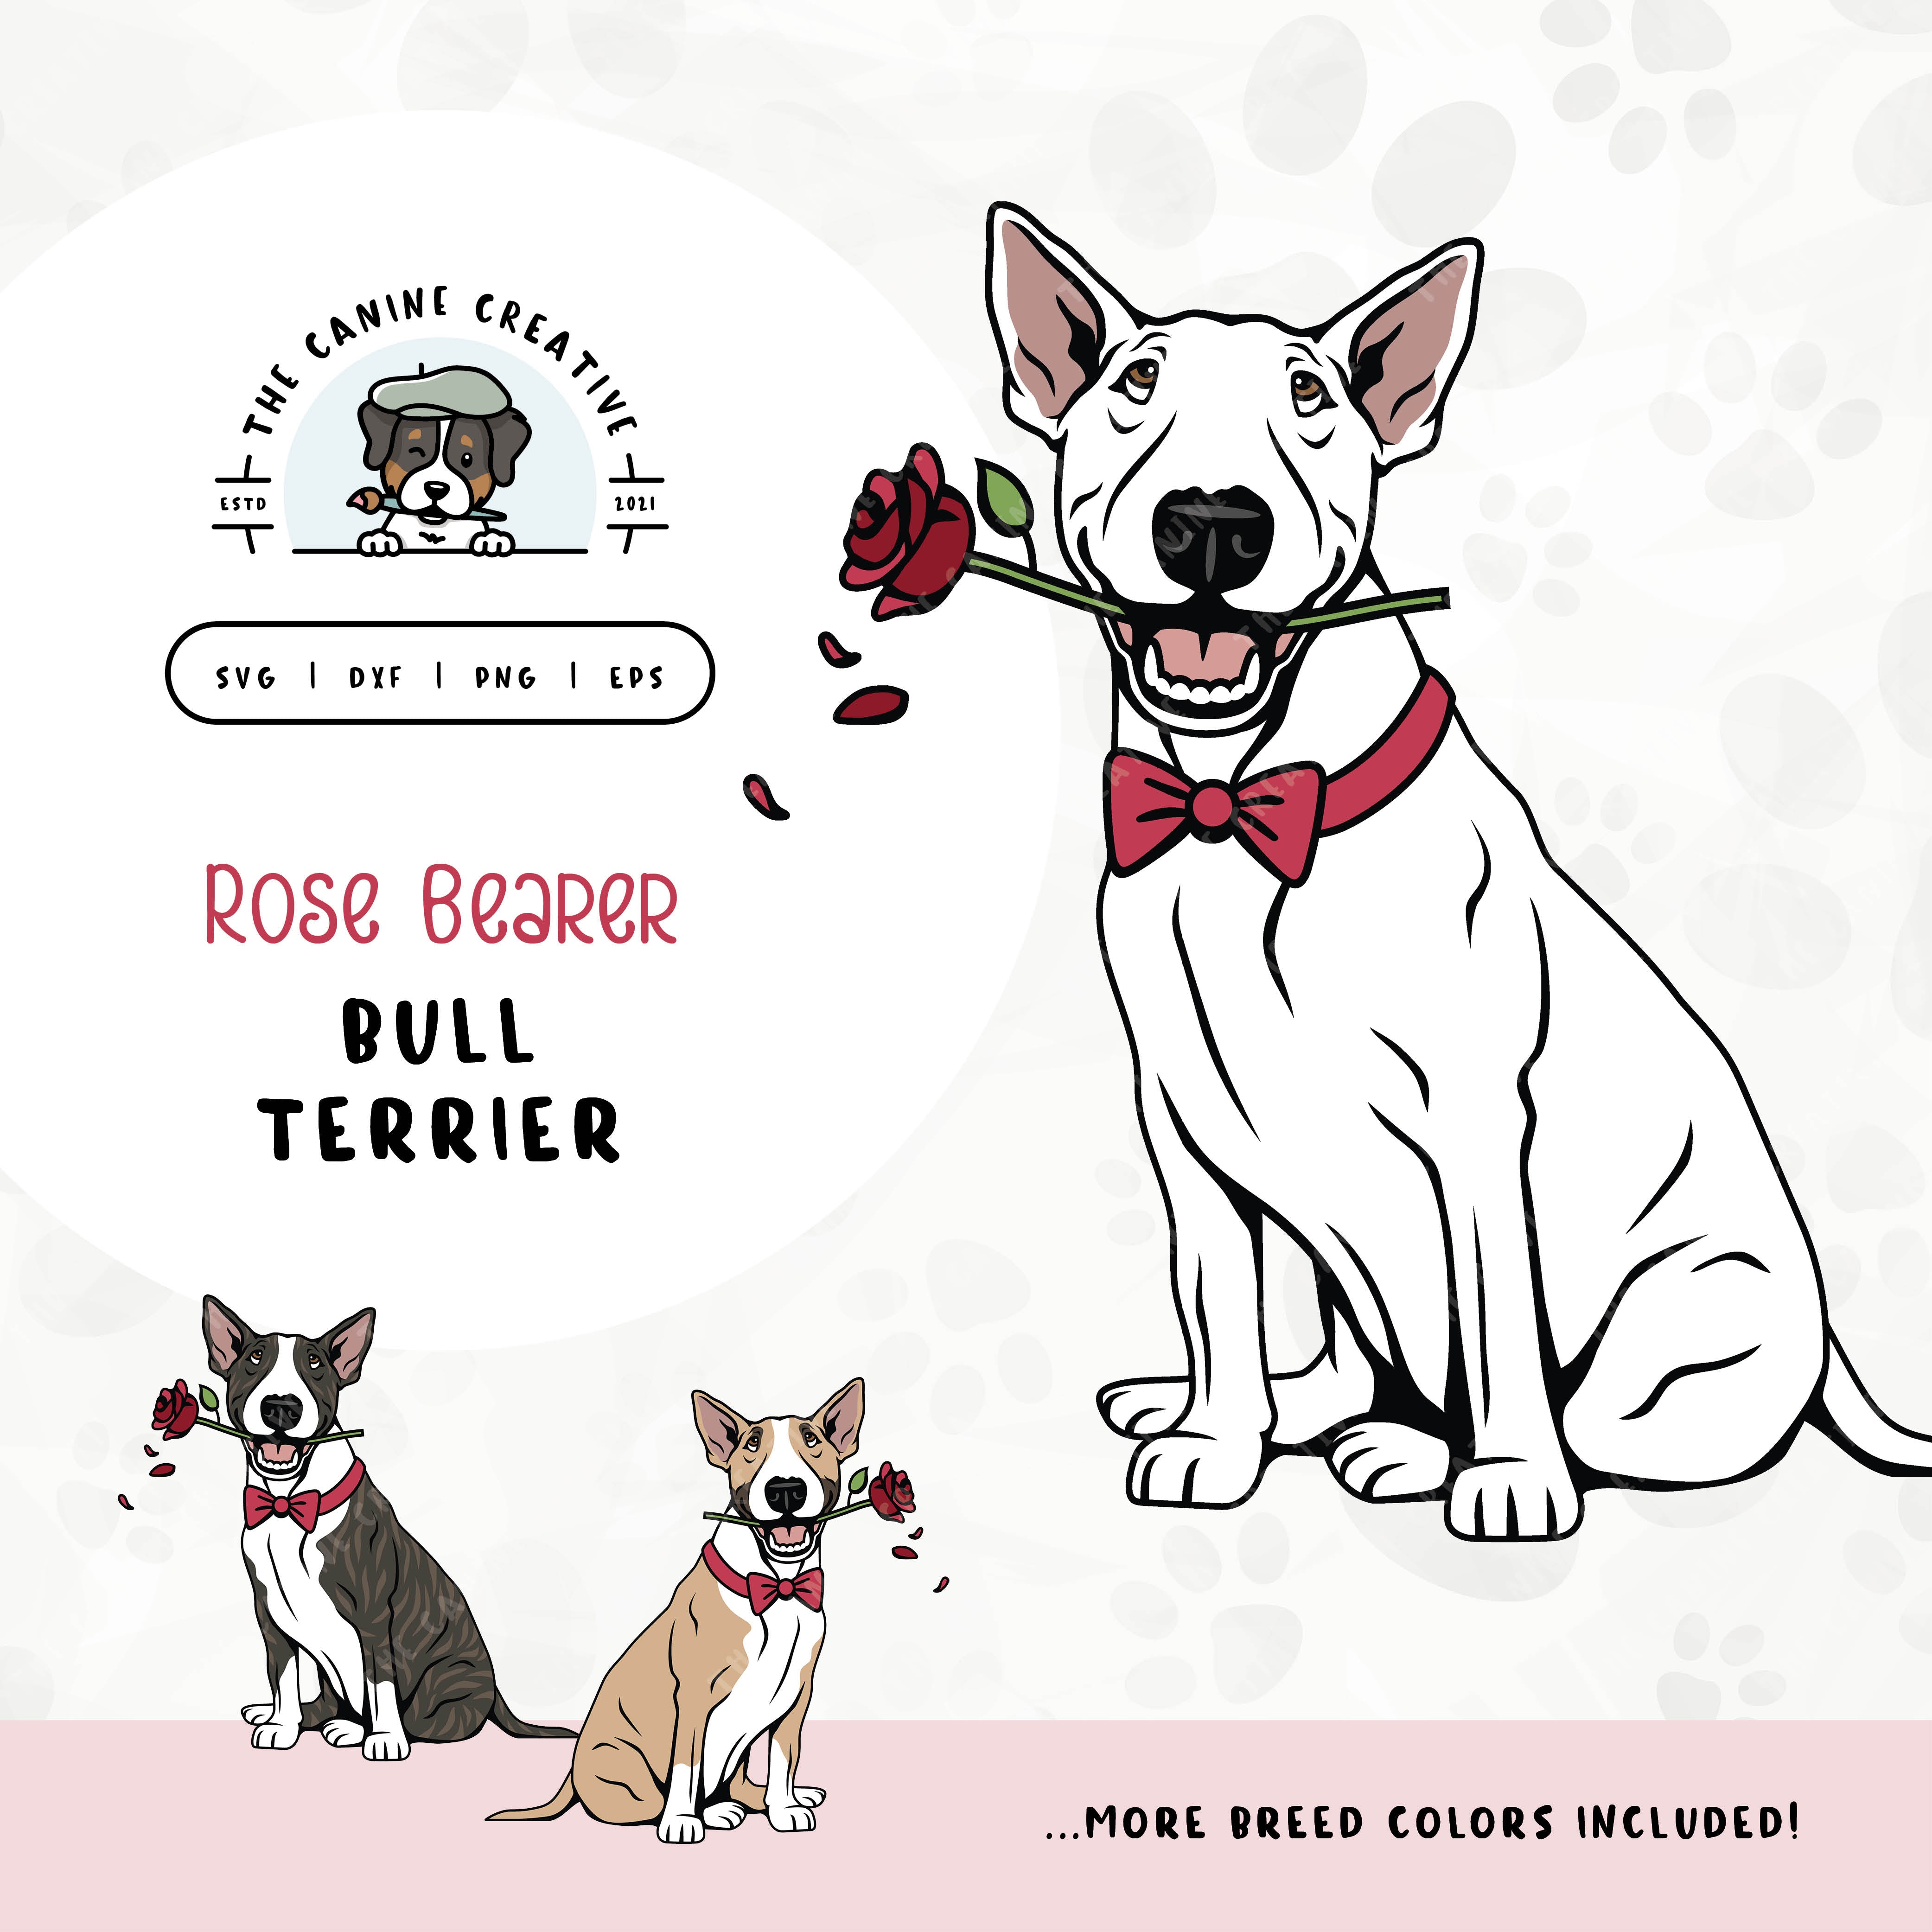 This charming illustration of a Bull Terrier with a long tail features a dapper dog adorned with a bow-tie and holding a rose. File formats include: SVG, DXF, PNG, and EPS.